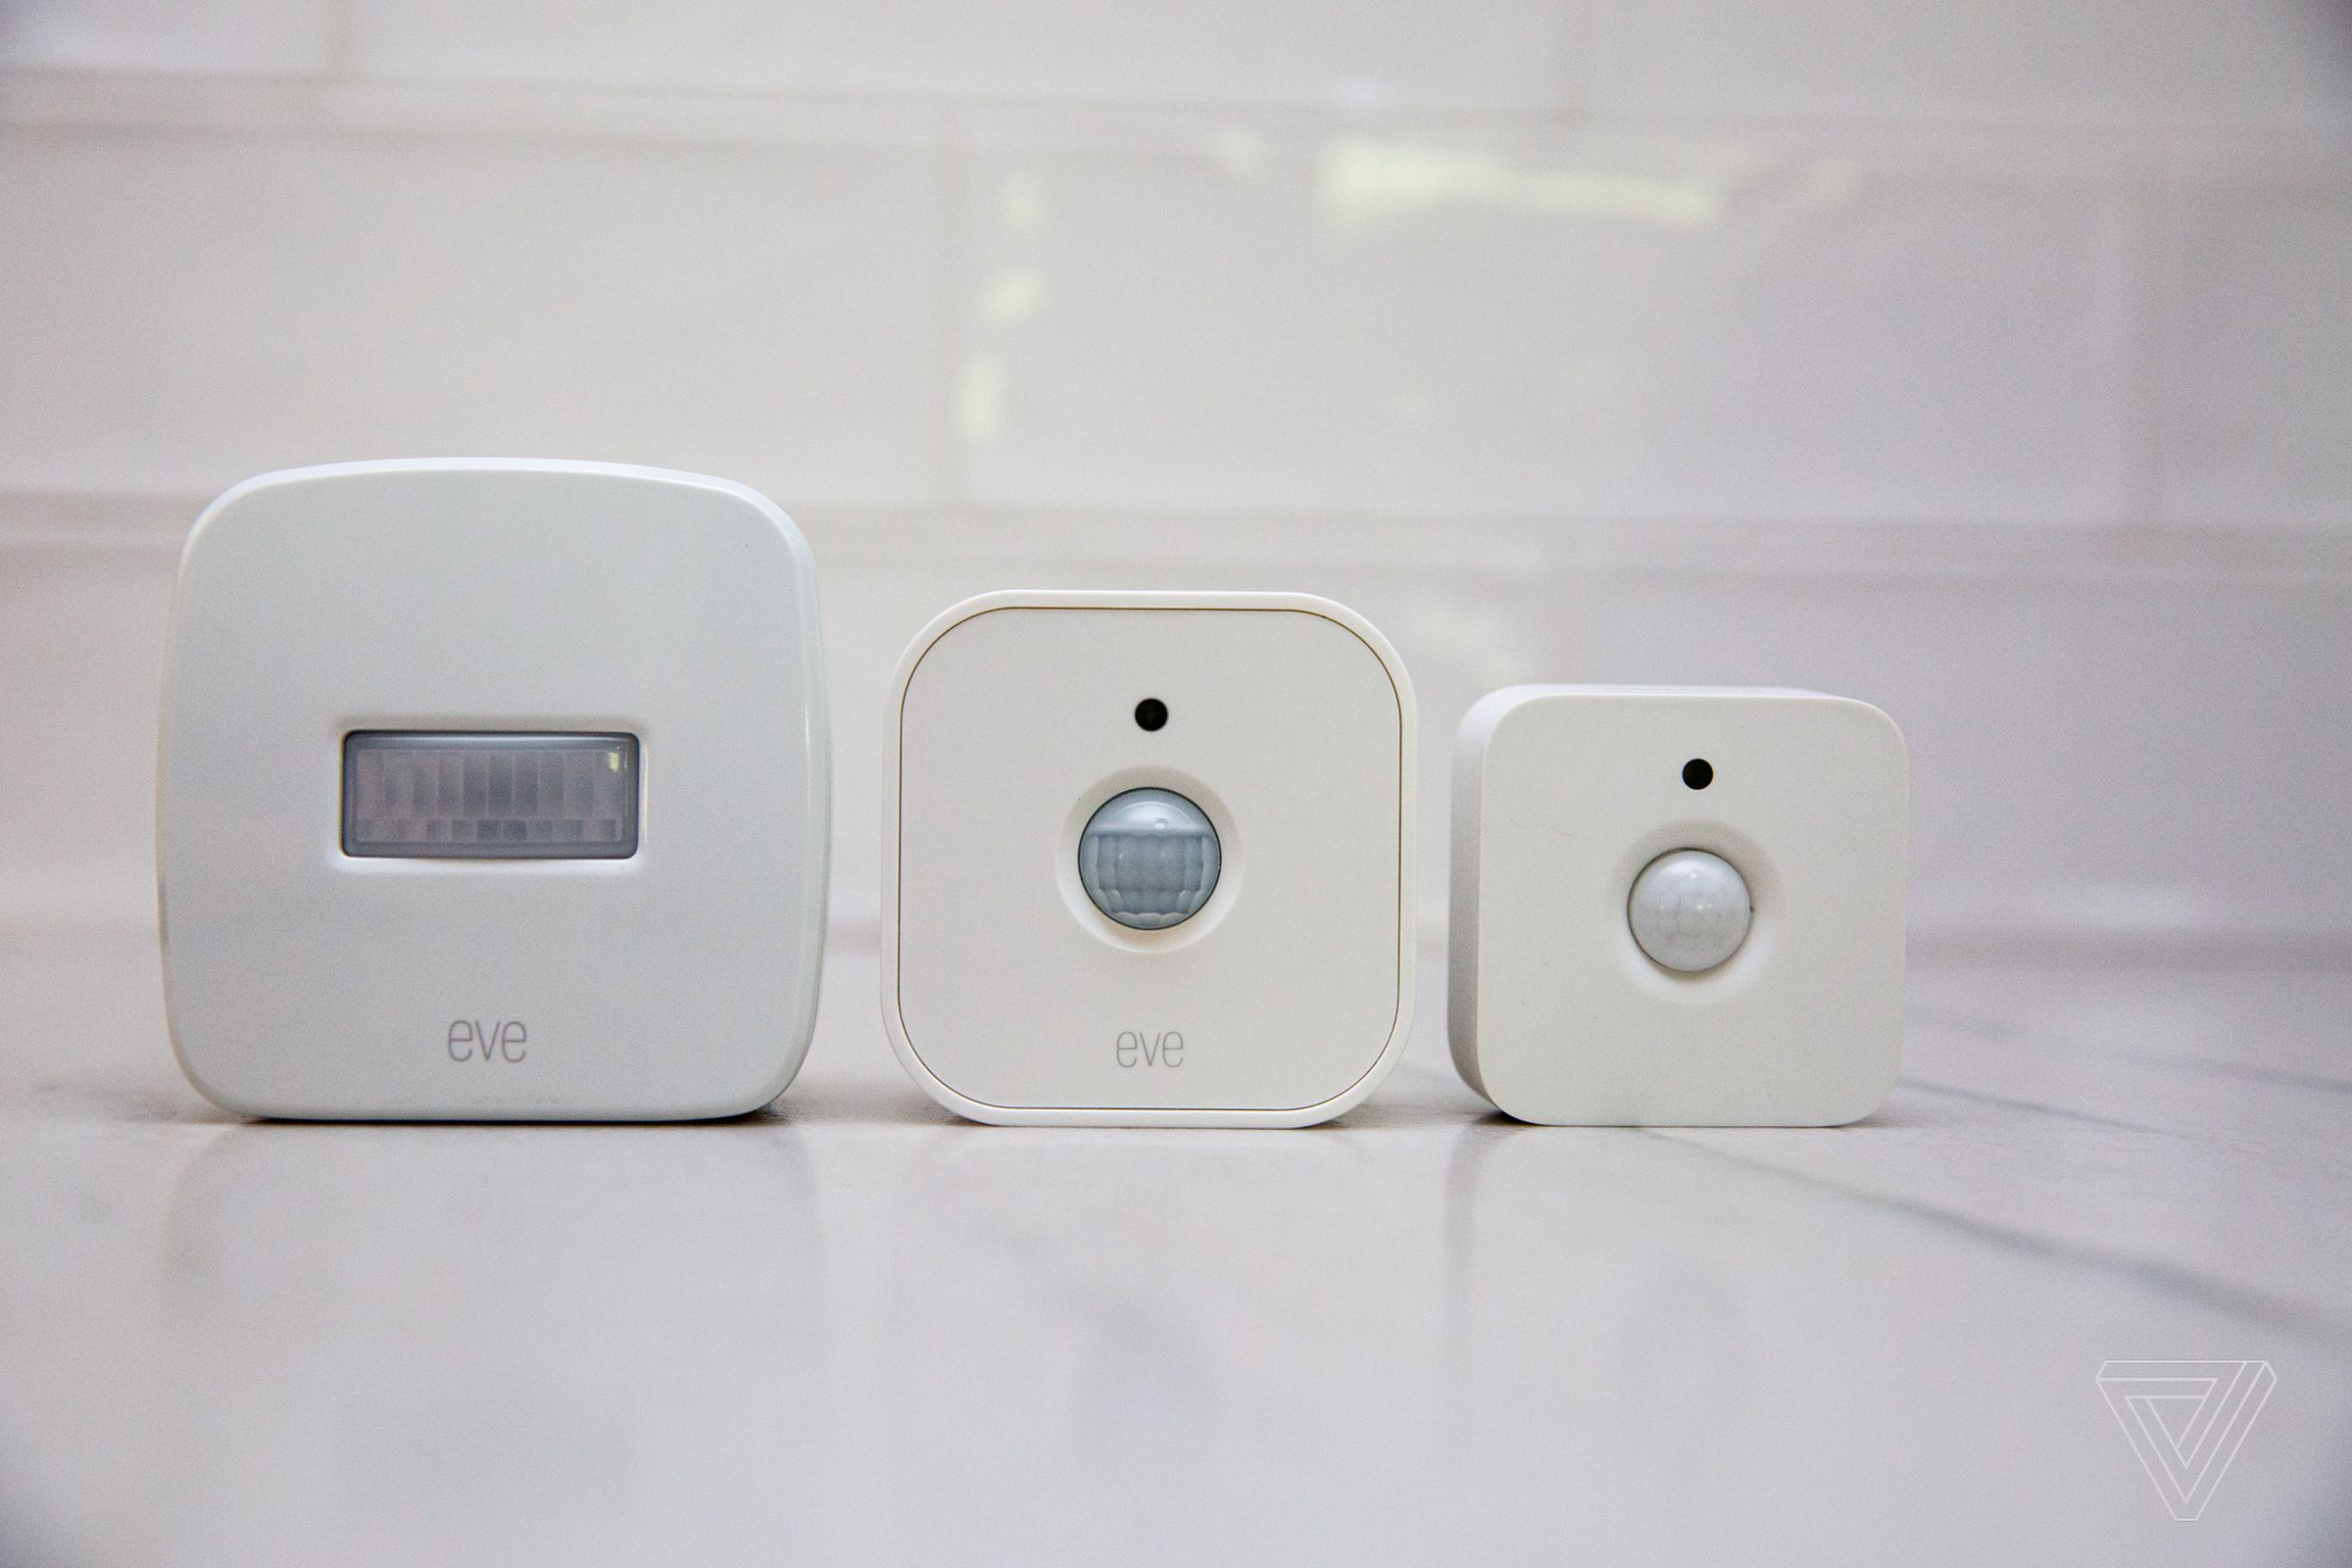 From left: the original Eve Motion sensor; the second-gen Eve; and the similar-looking Philips Hue Motion Sensor.